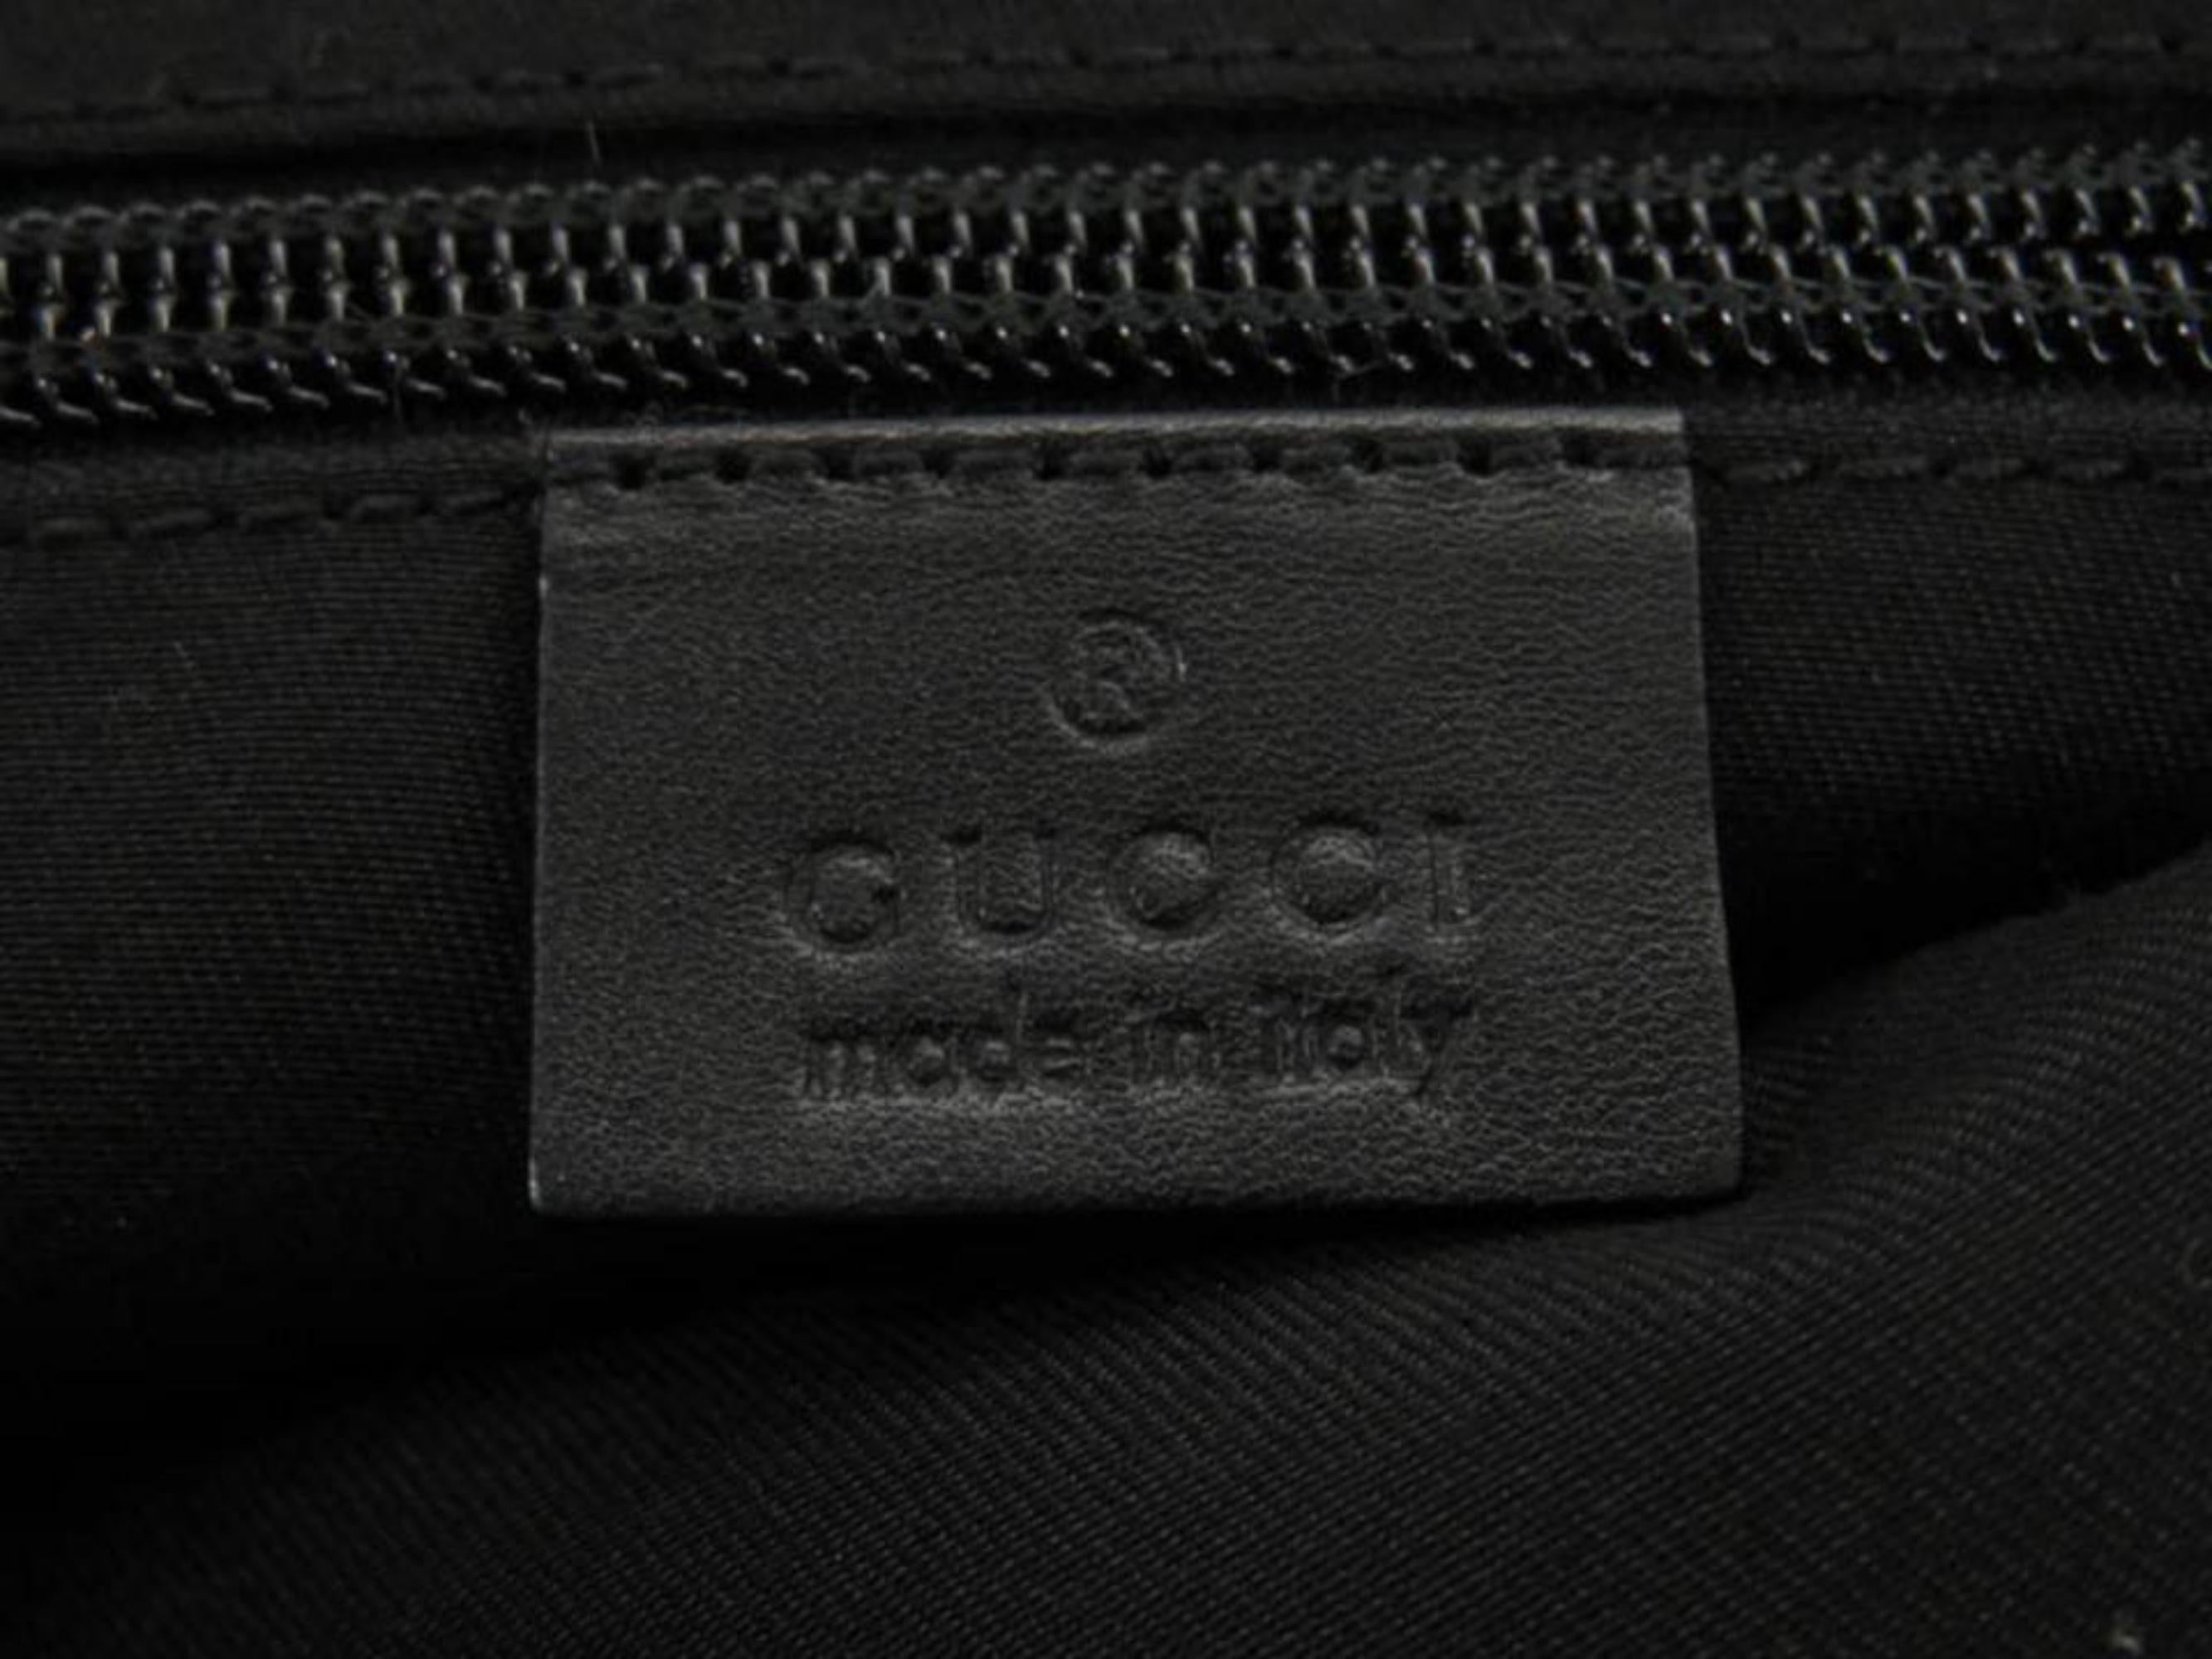 Gucci Gg Belt Pouch Waist Pack 867065 Black Coated Canvas Cross Body Bag In Good Condition For Sale In Forest Hills, NY